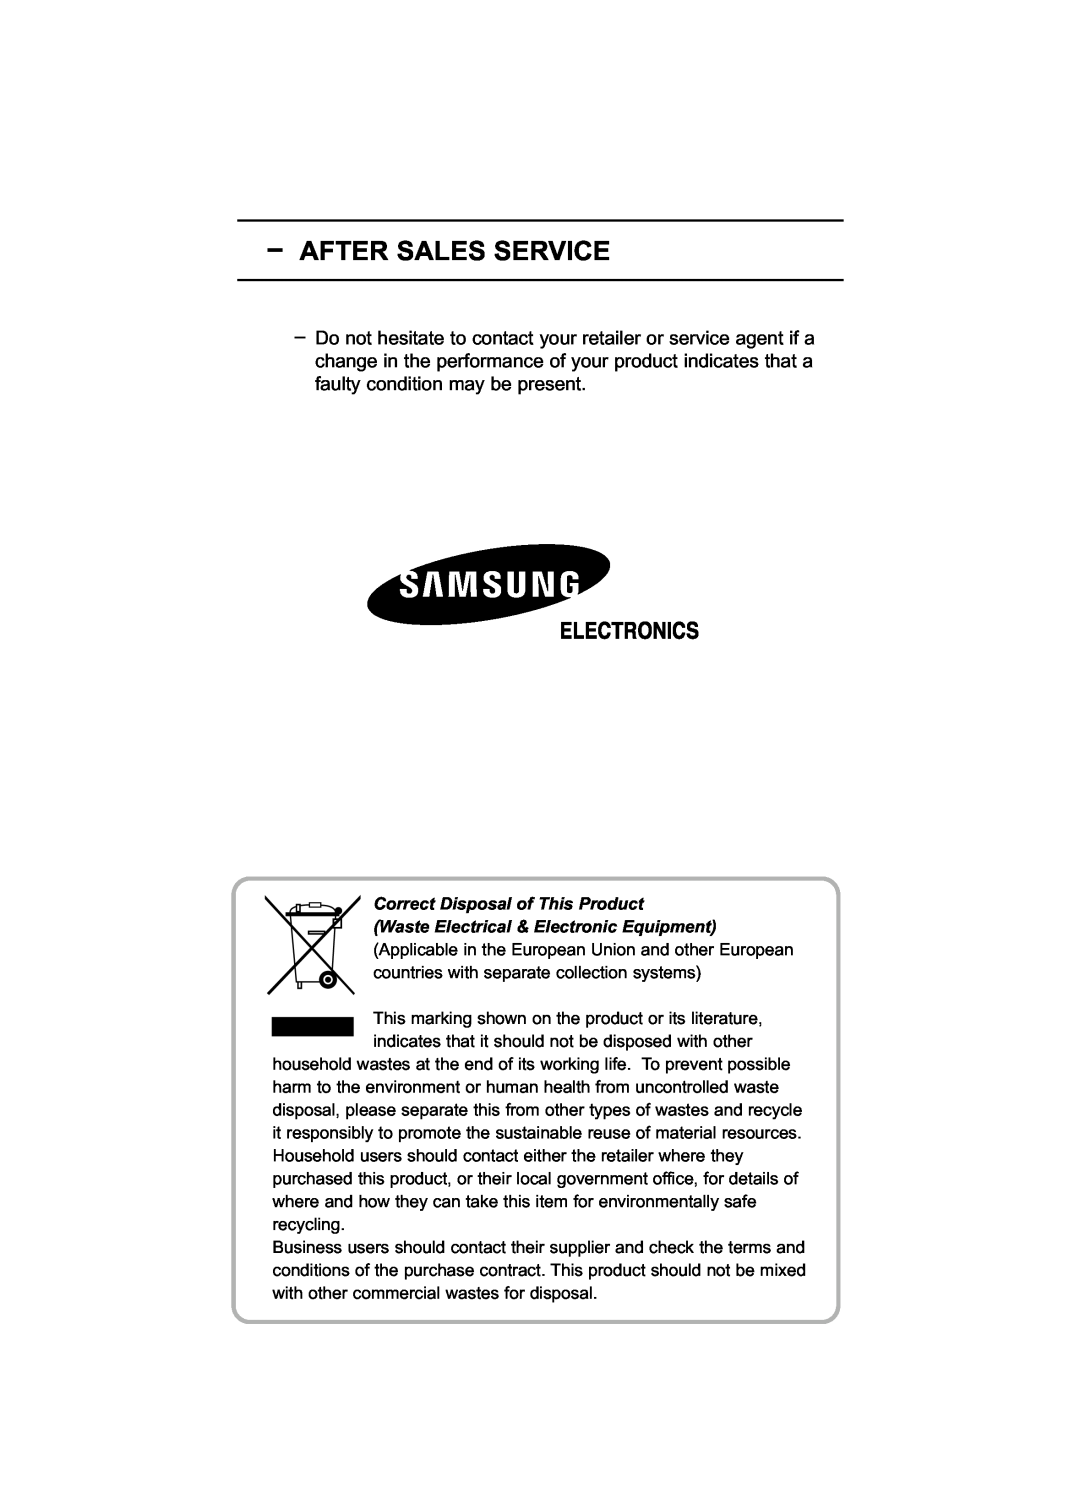 Samsung LE32R53BD manual After Sales Service, Correct Disposal of This Product, Waste Electrical & Electronic Equipment 